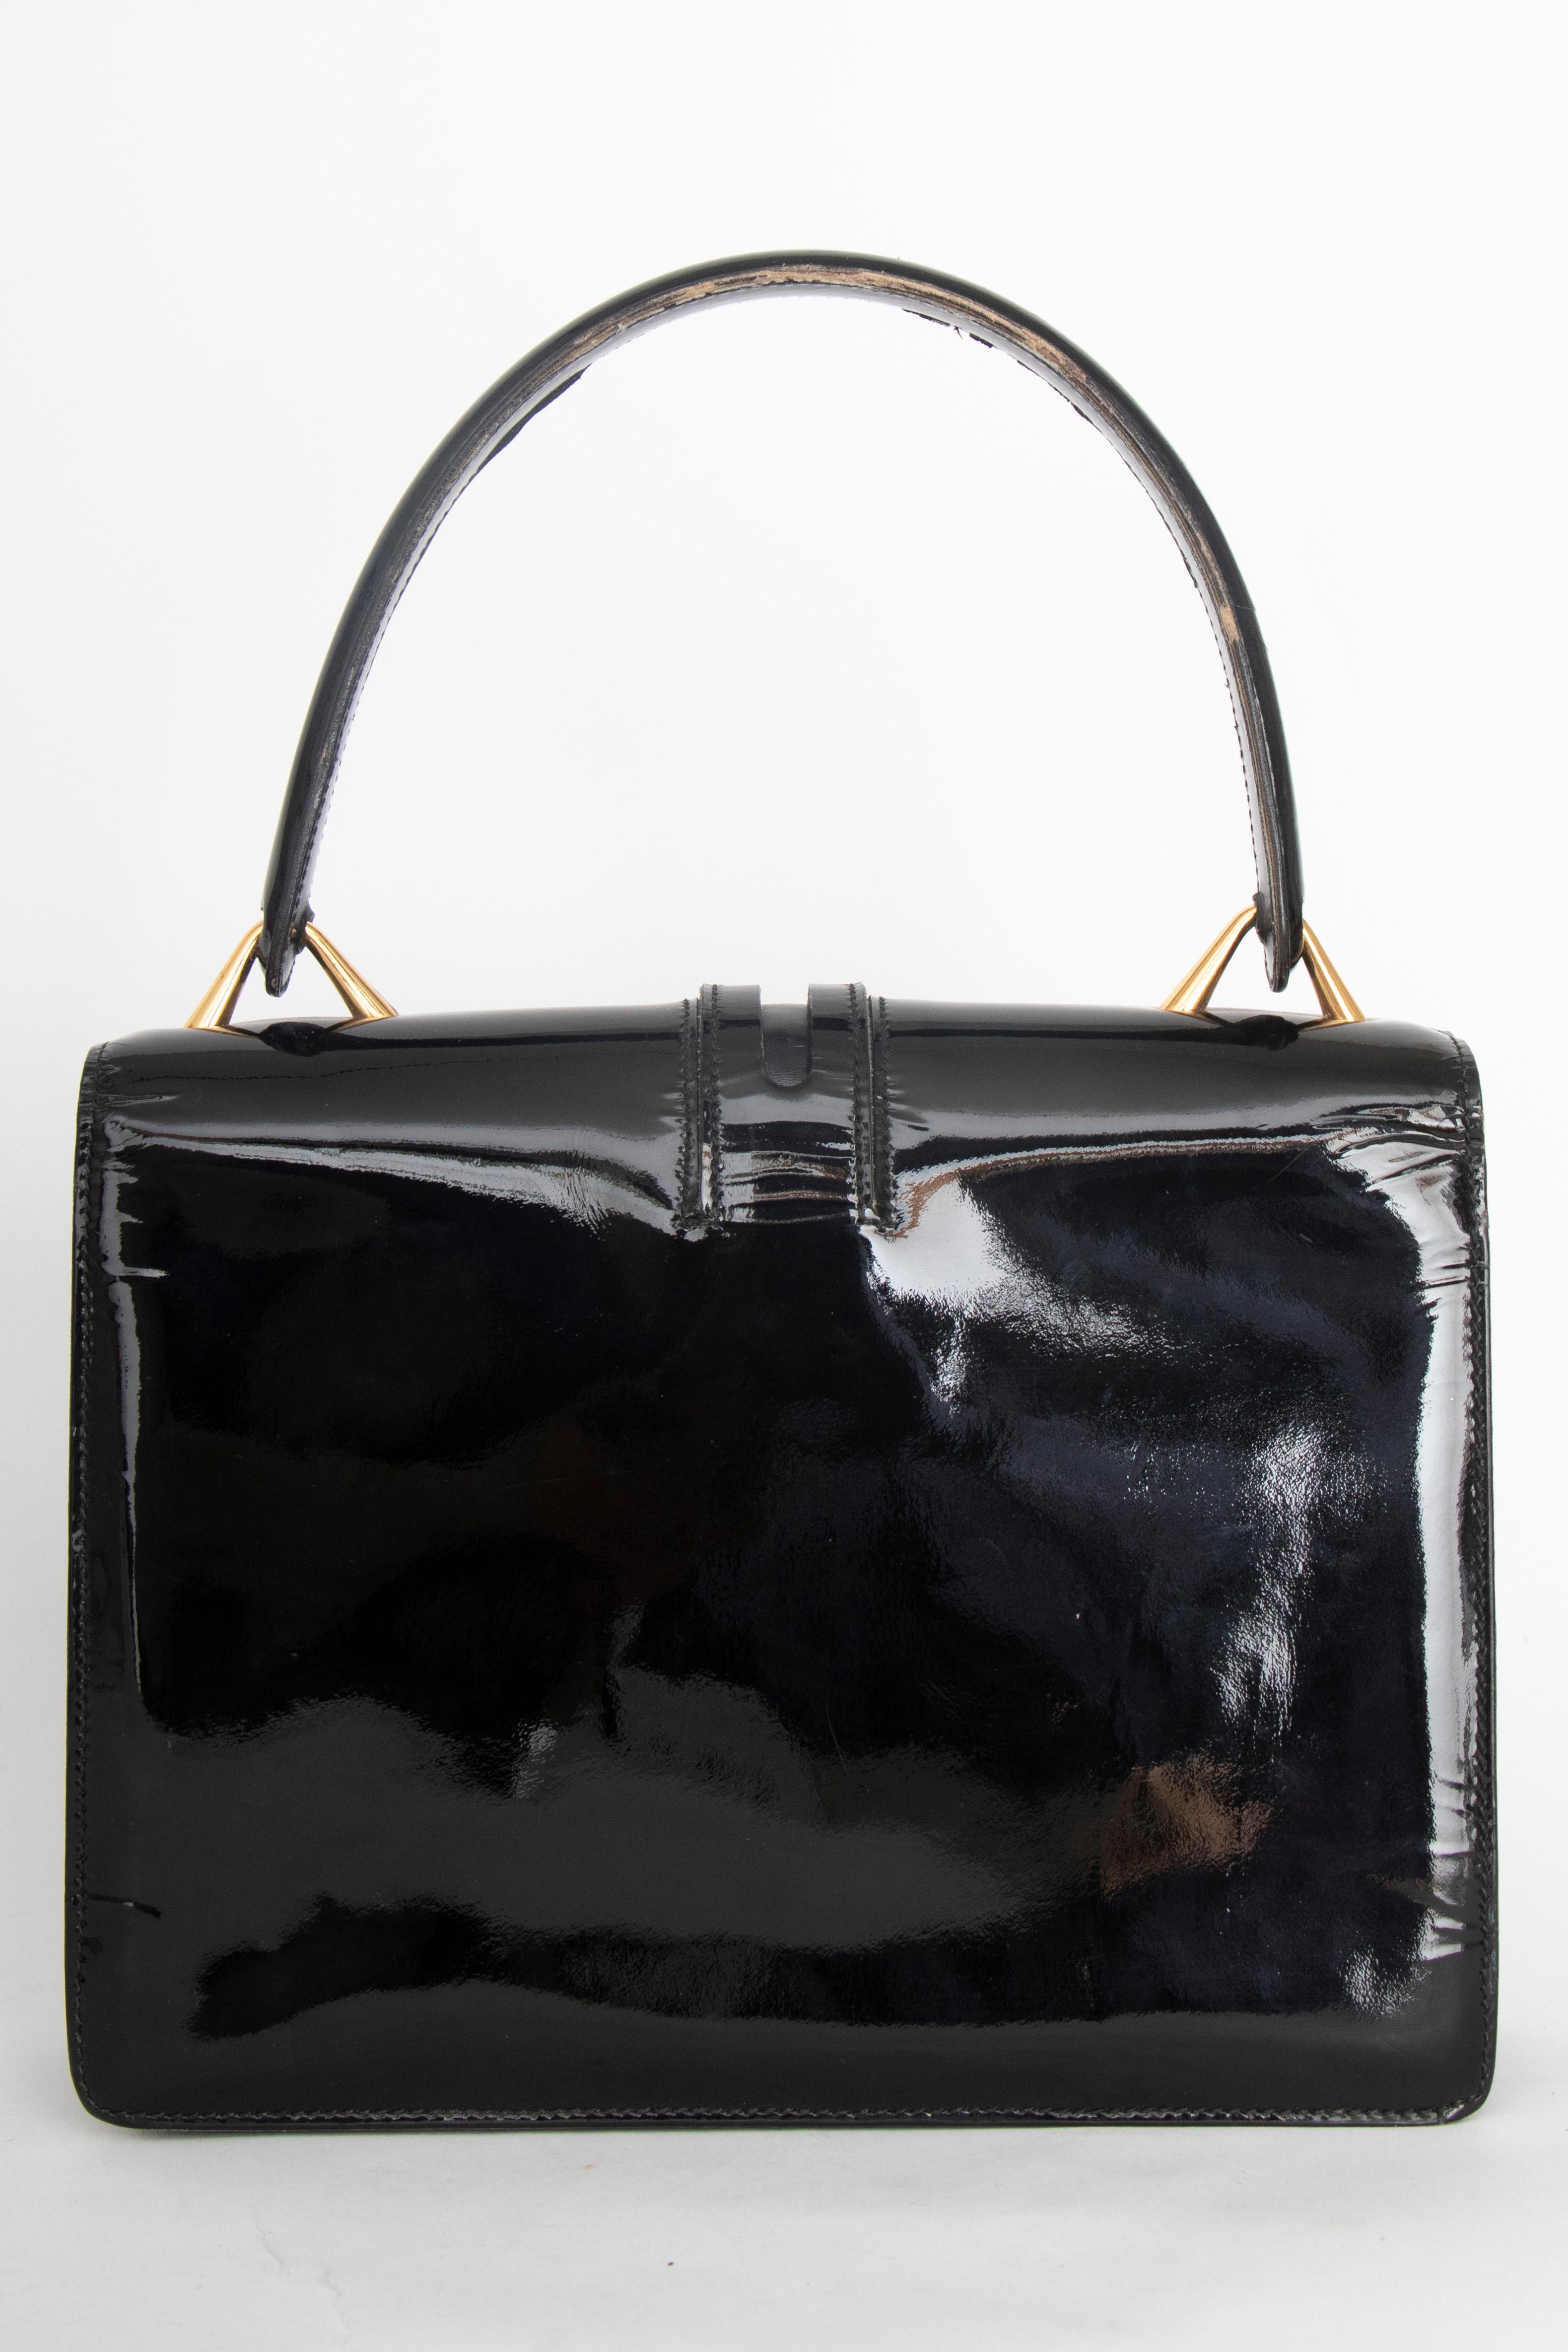 A 1960s Vintage Gucci Black Patent Leather Handbag with Gold Hardware In Good Condition For Sale In Copenhagen, DK